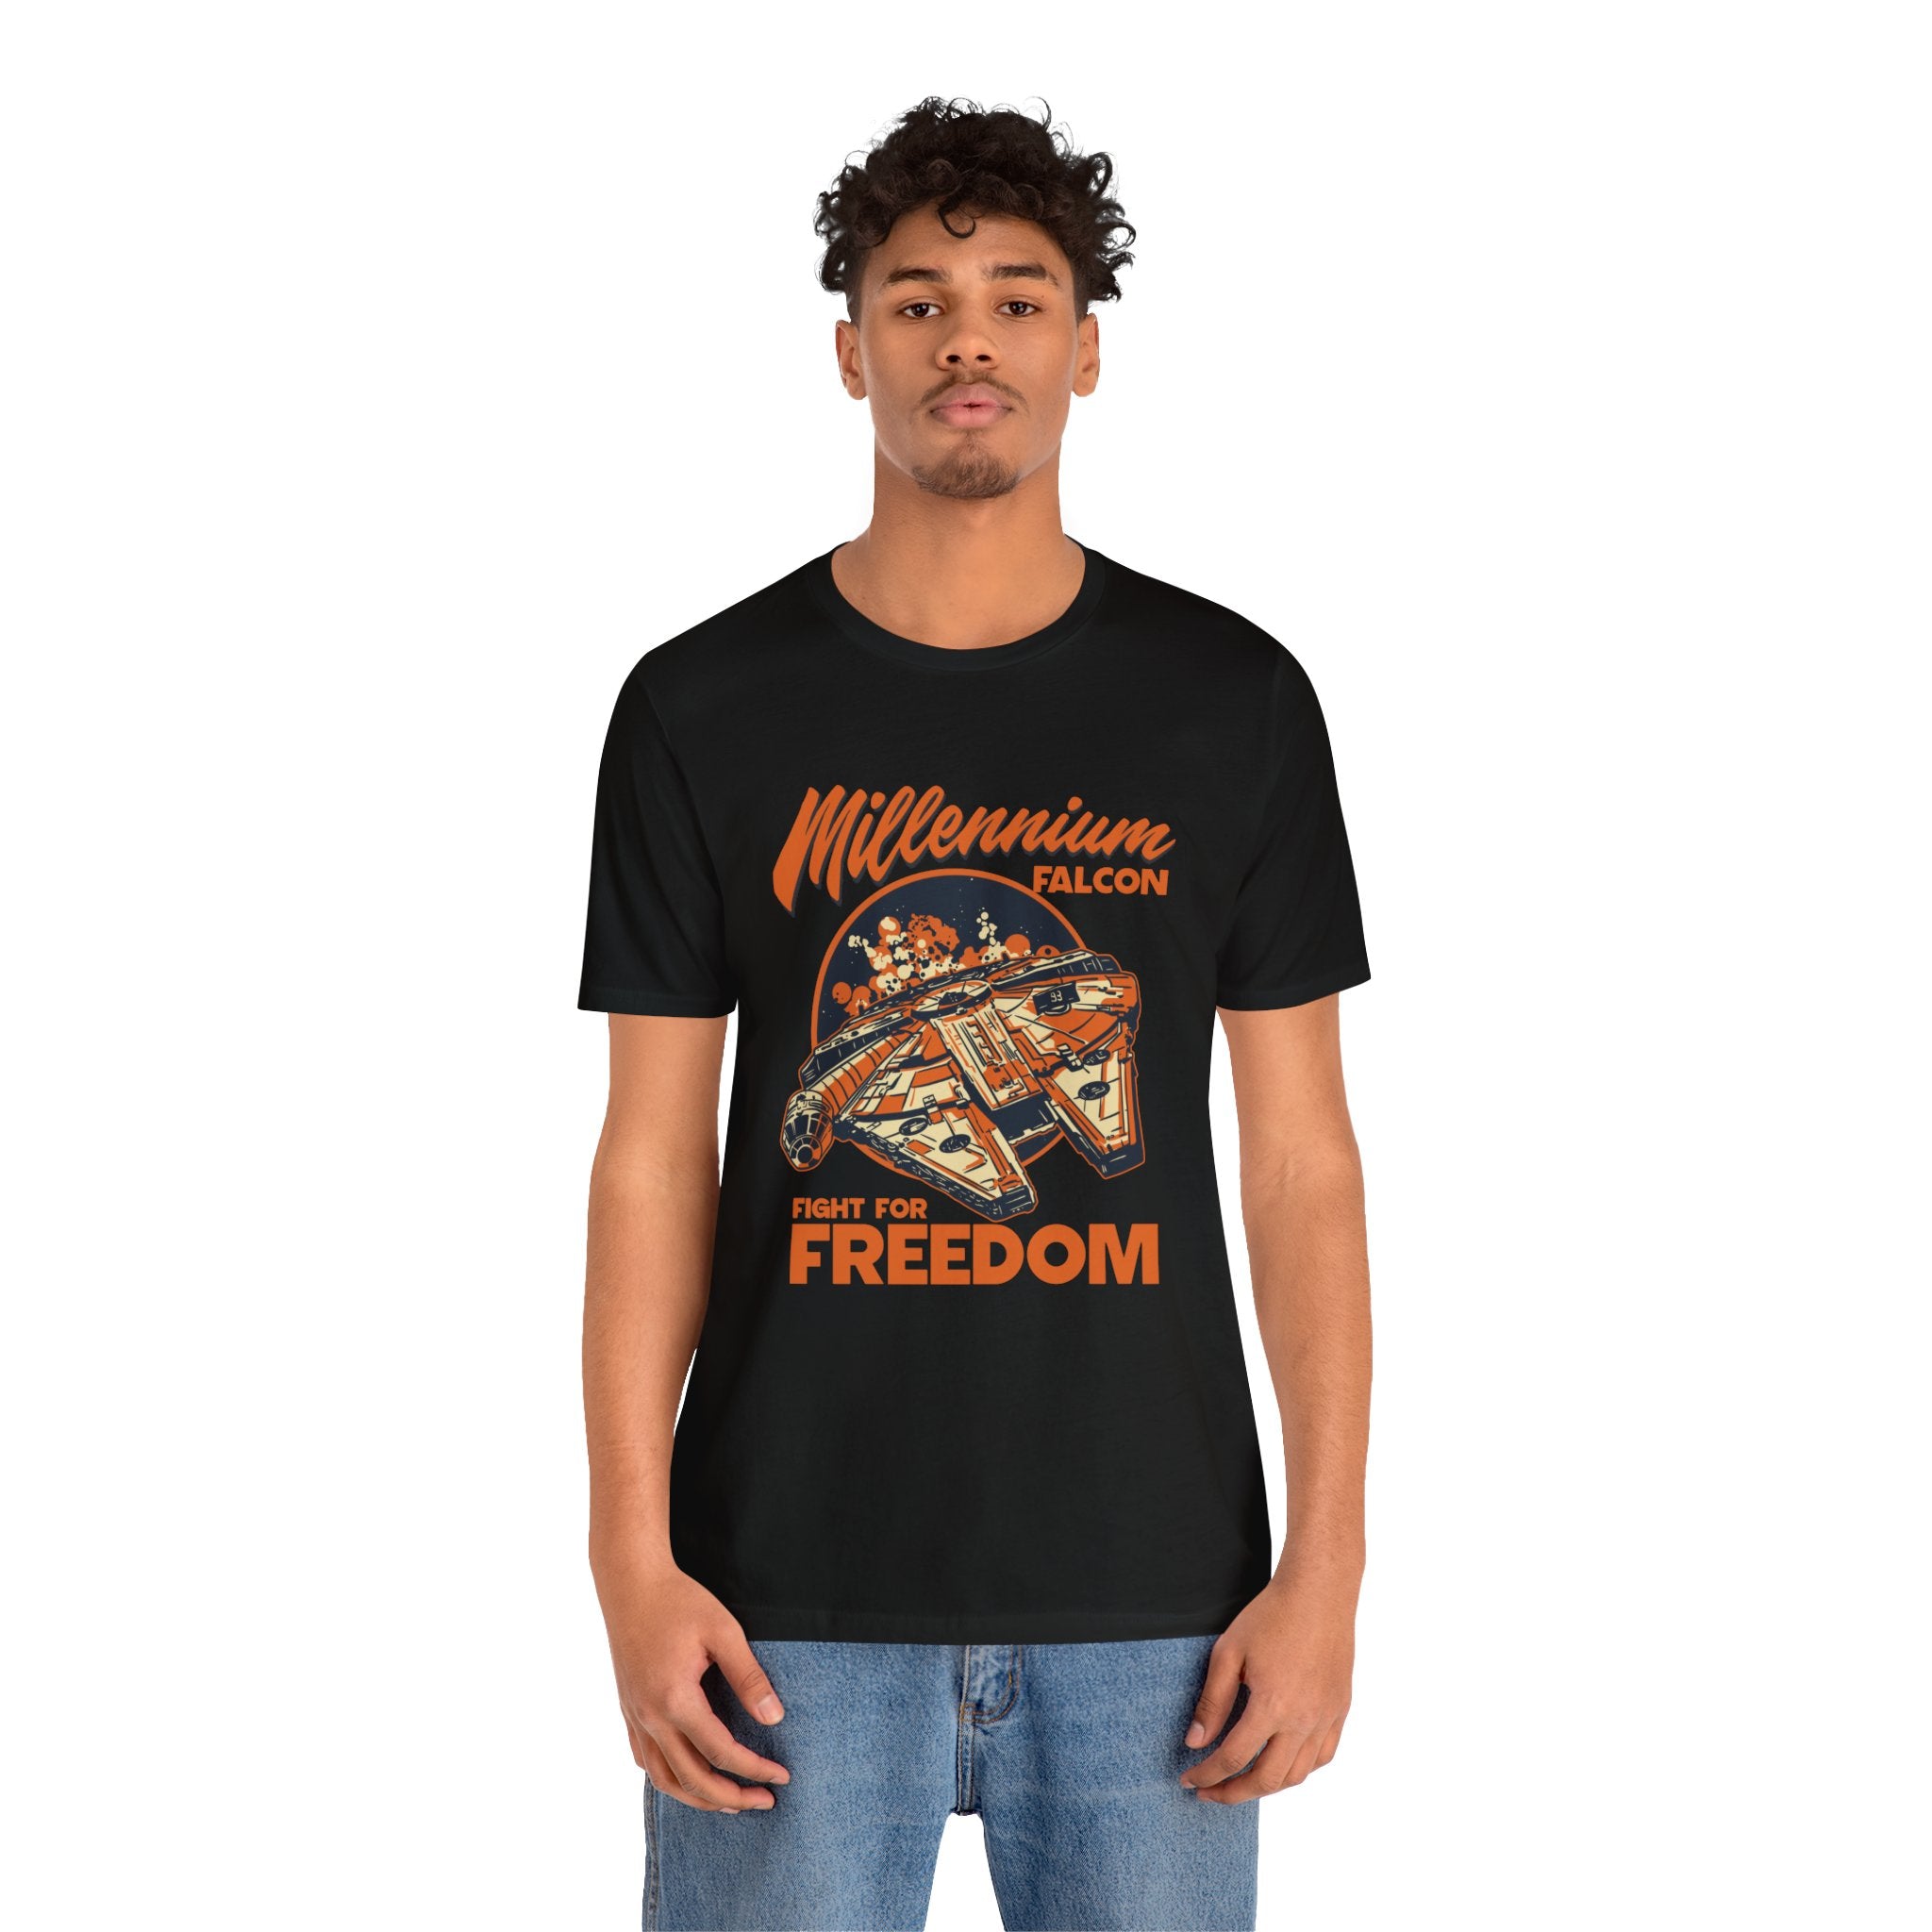 A young man wearing a black t-shirt with a "Falcon" quality print and text that reads "fight for freedom," paired with blue jeans.